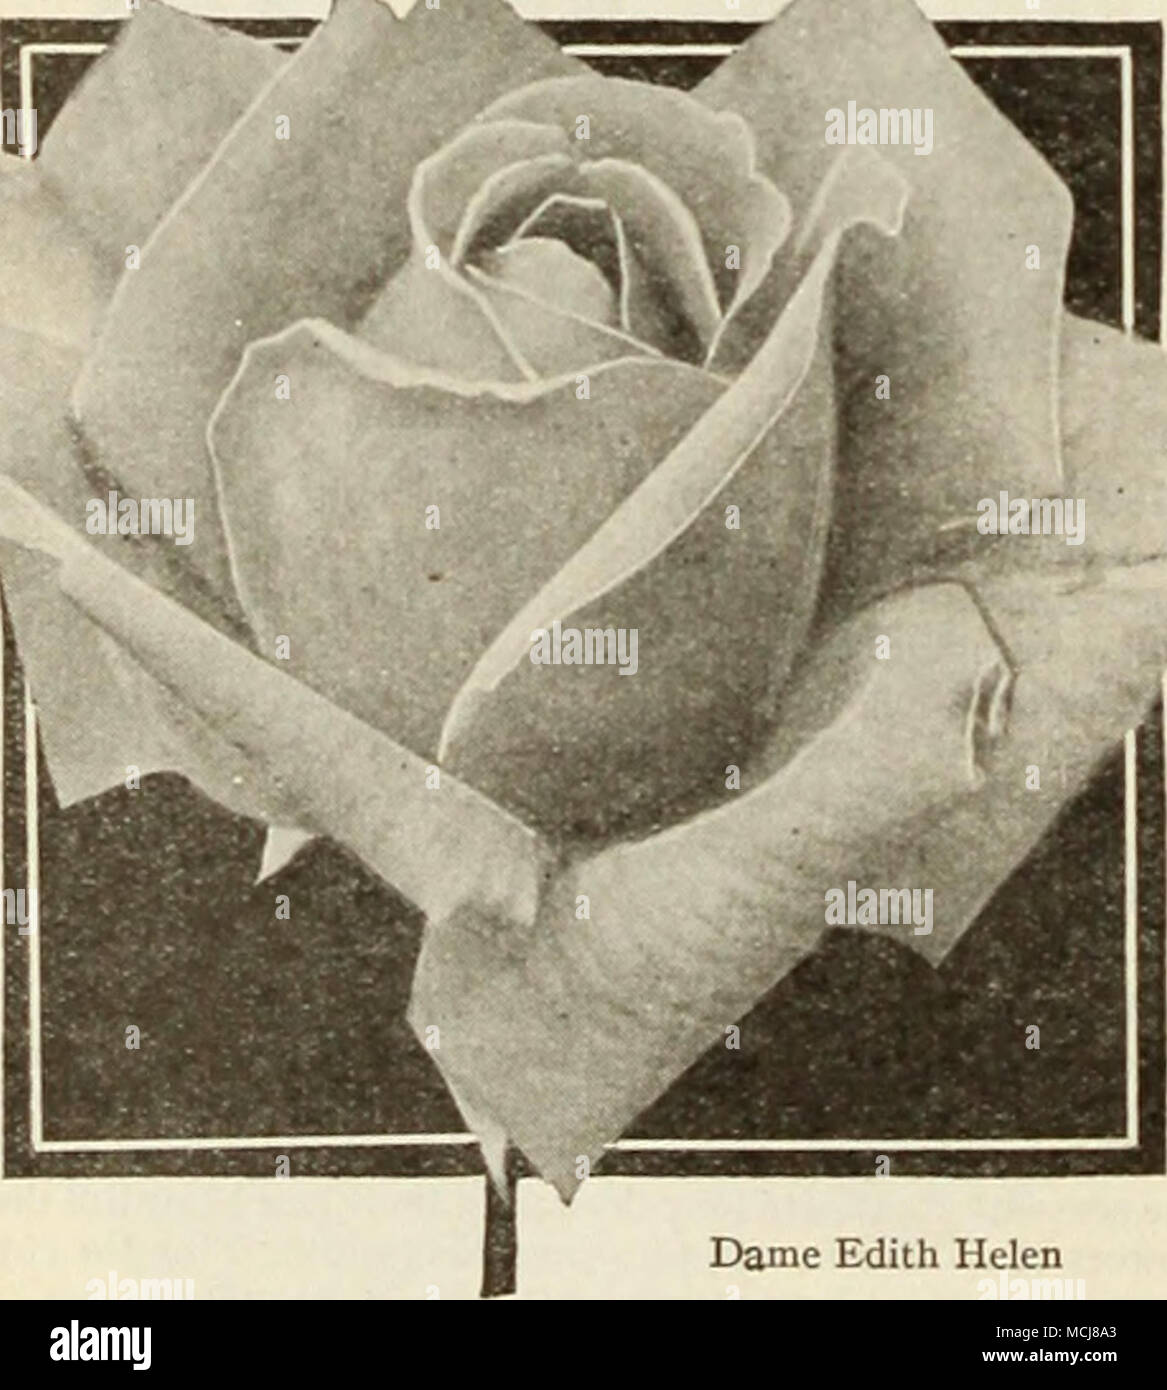 Dame Edith Helen Dame Edith Helen. Lovely long pointed buds developing into  great flowers composed of substantial broad petals wliich curl back most  attractively. The blooms are fully double, high- centered,